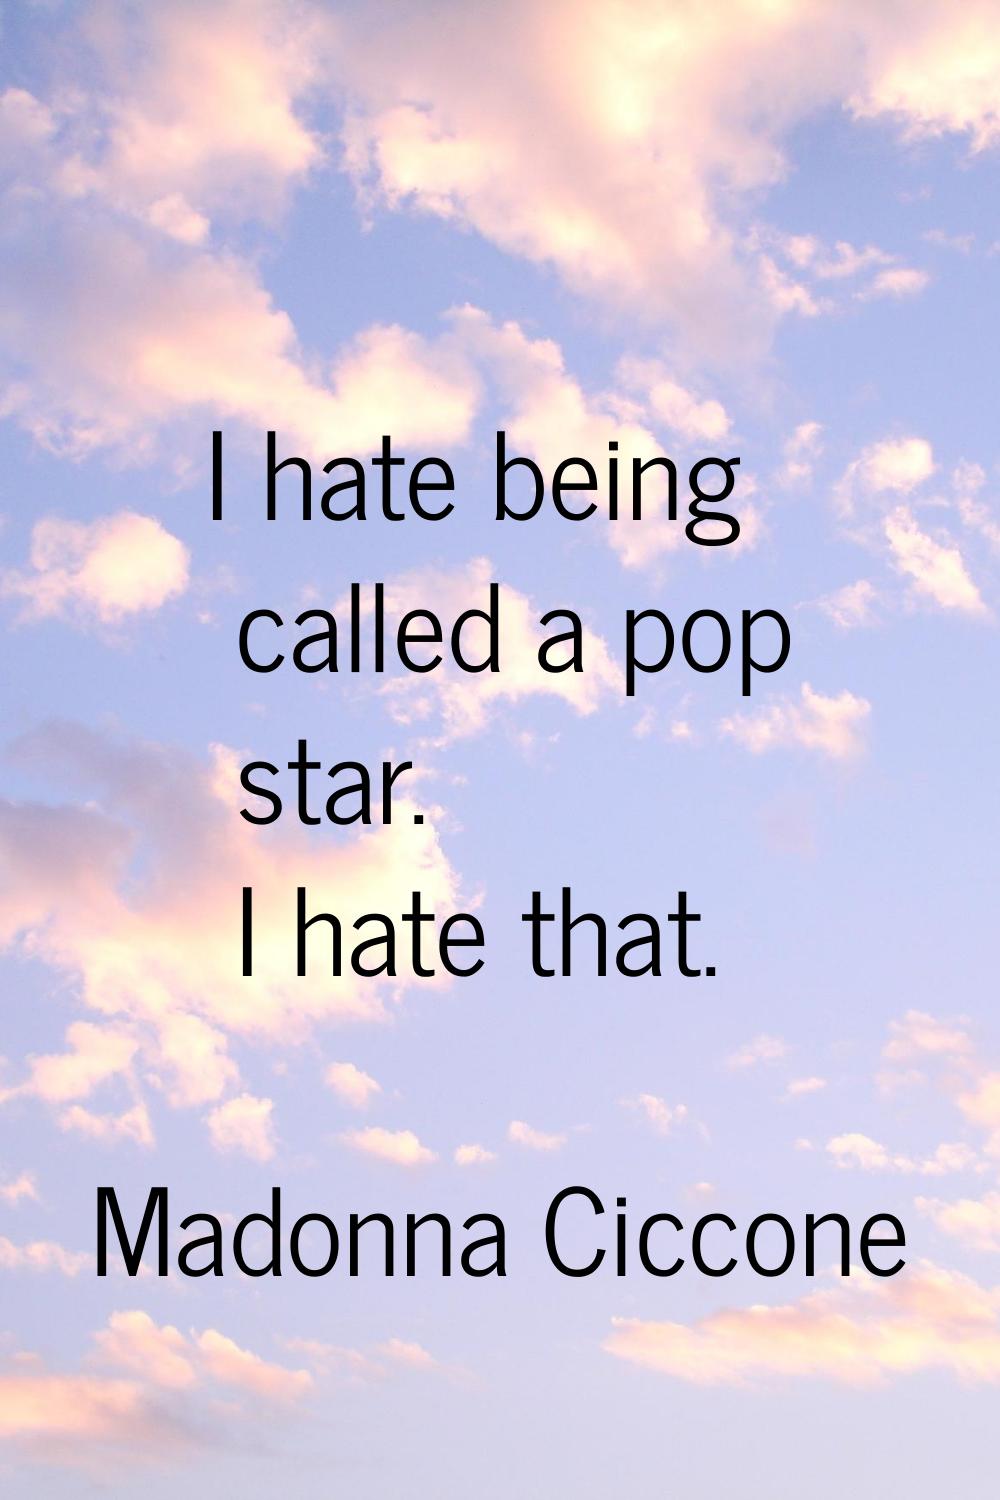 I hate being called a pop star. I hate that.